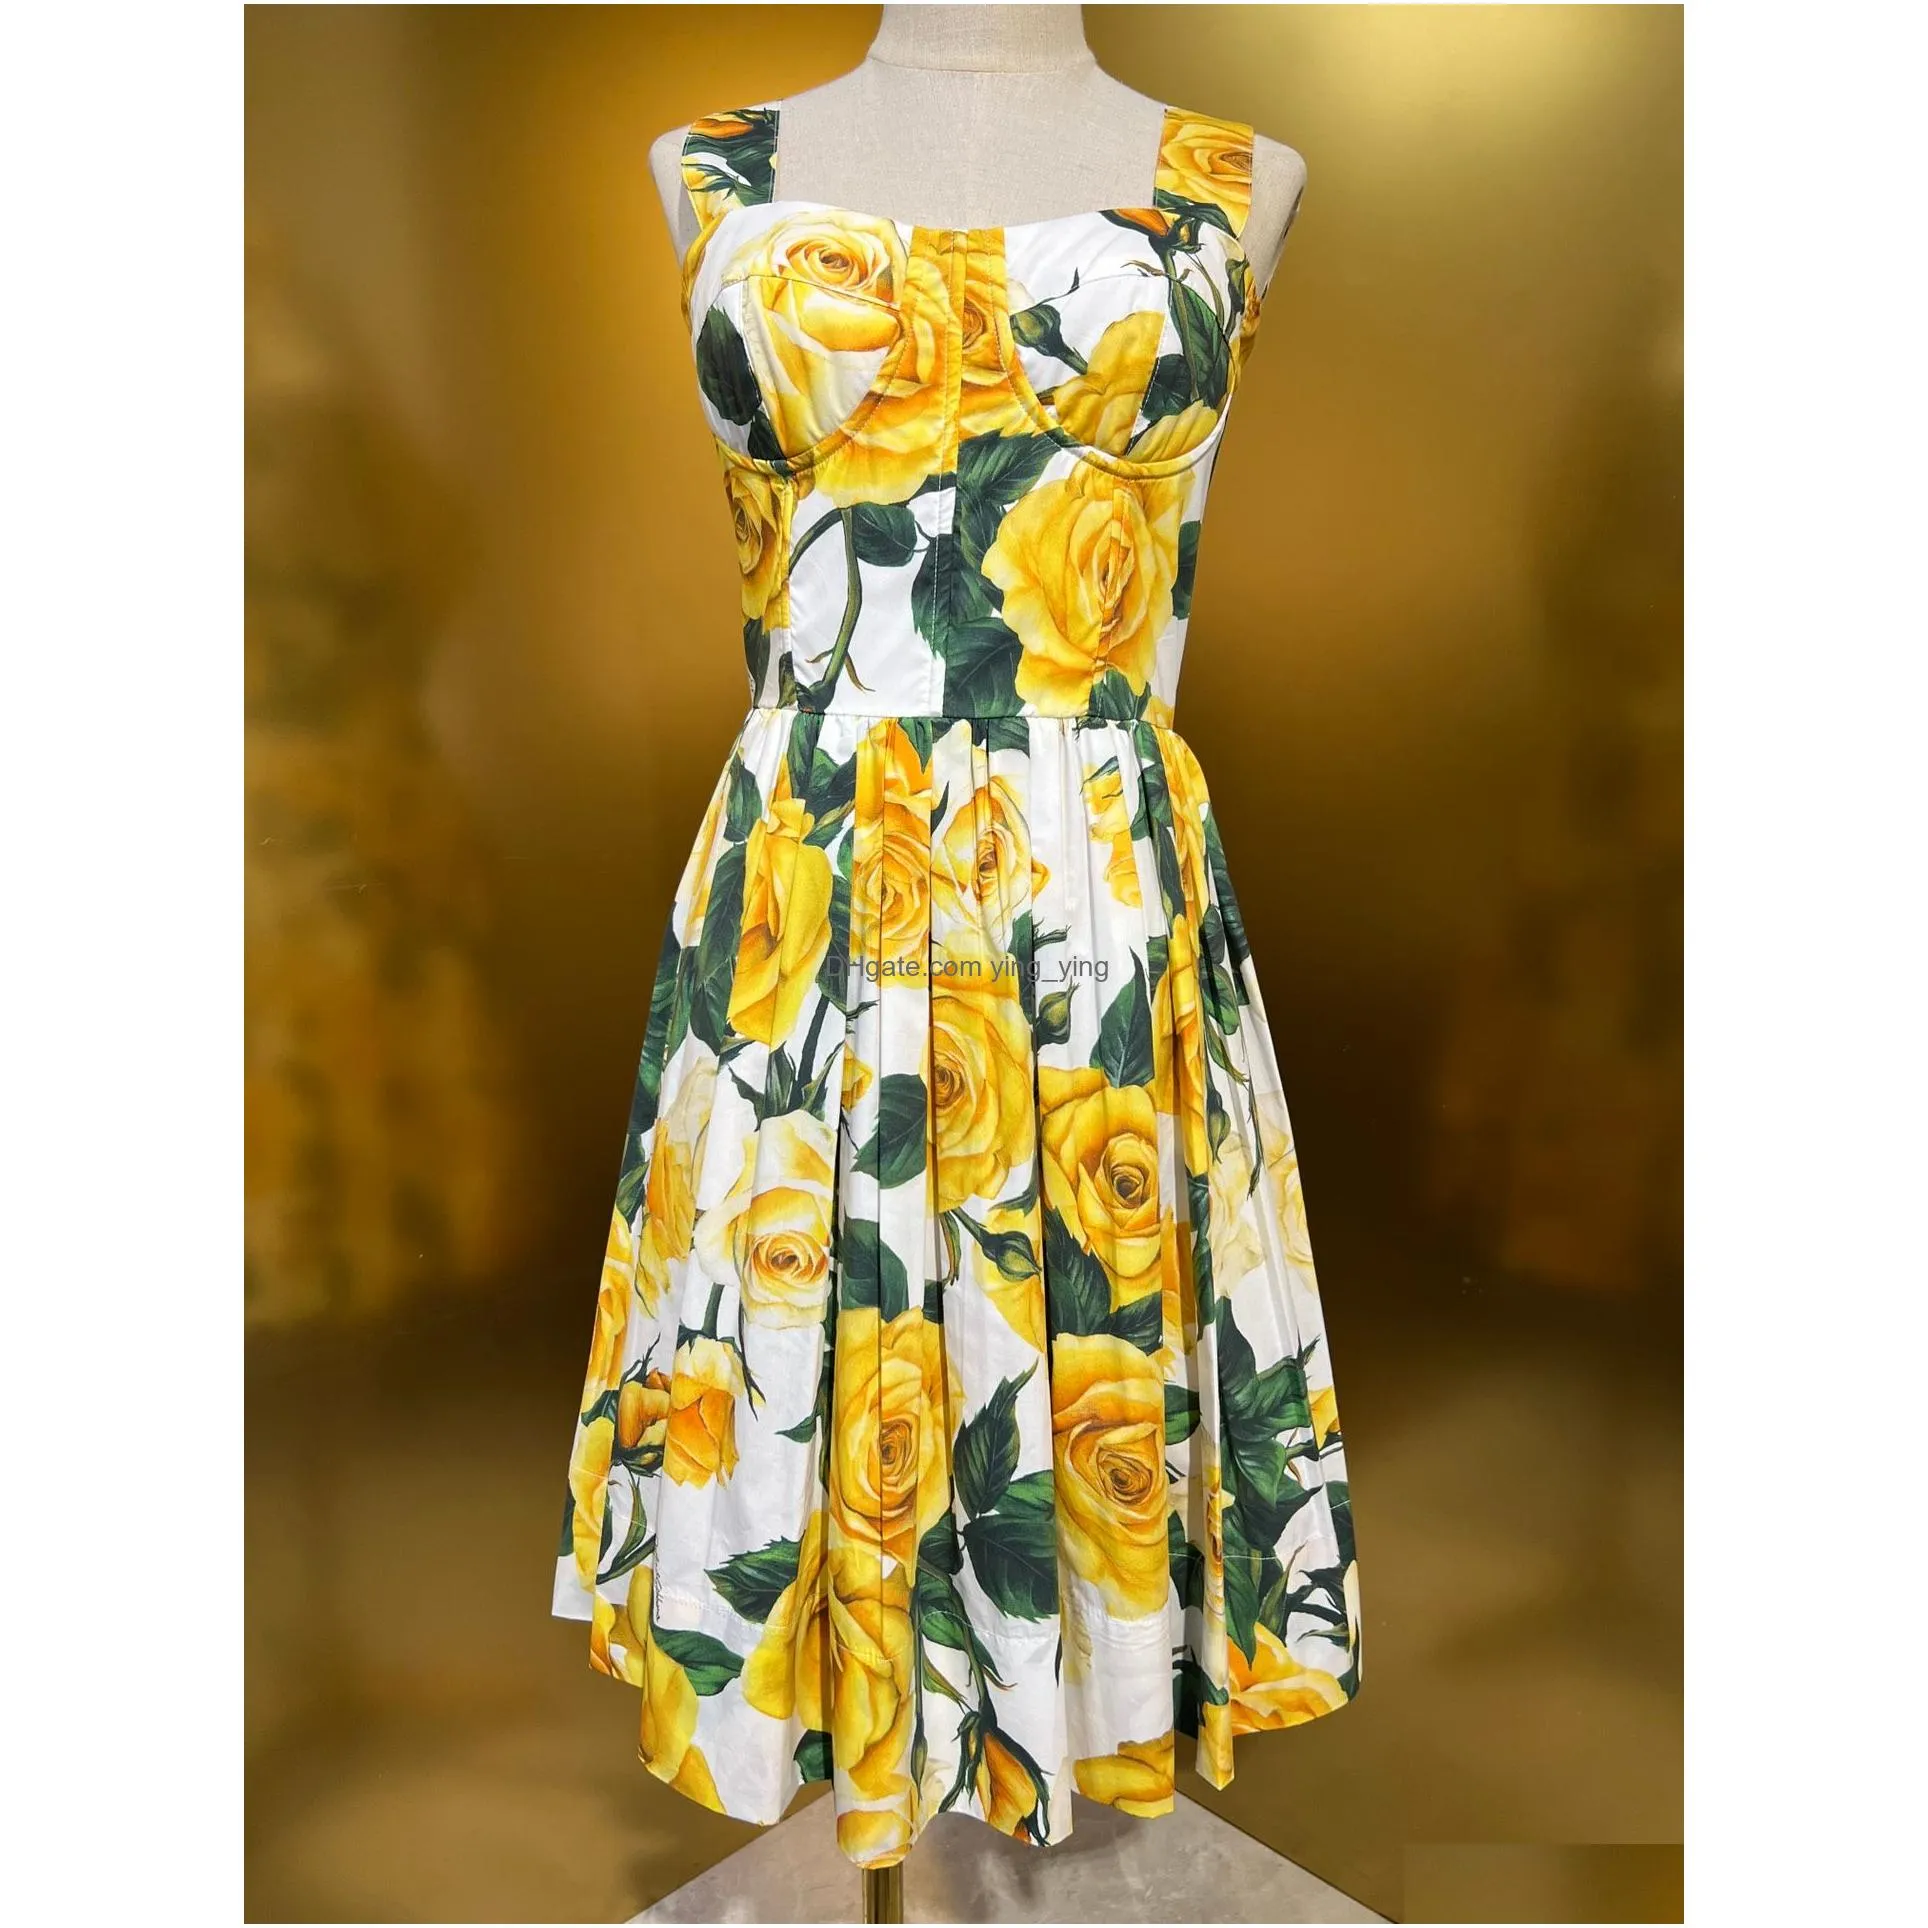 the yellow rose dress showcases all kinds of charm